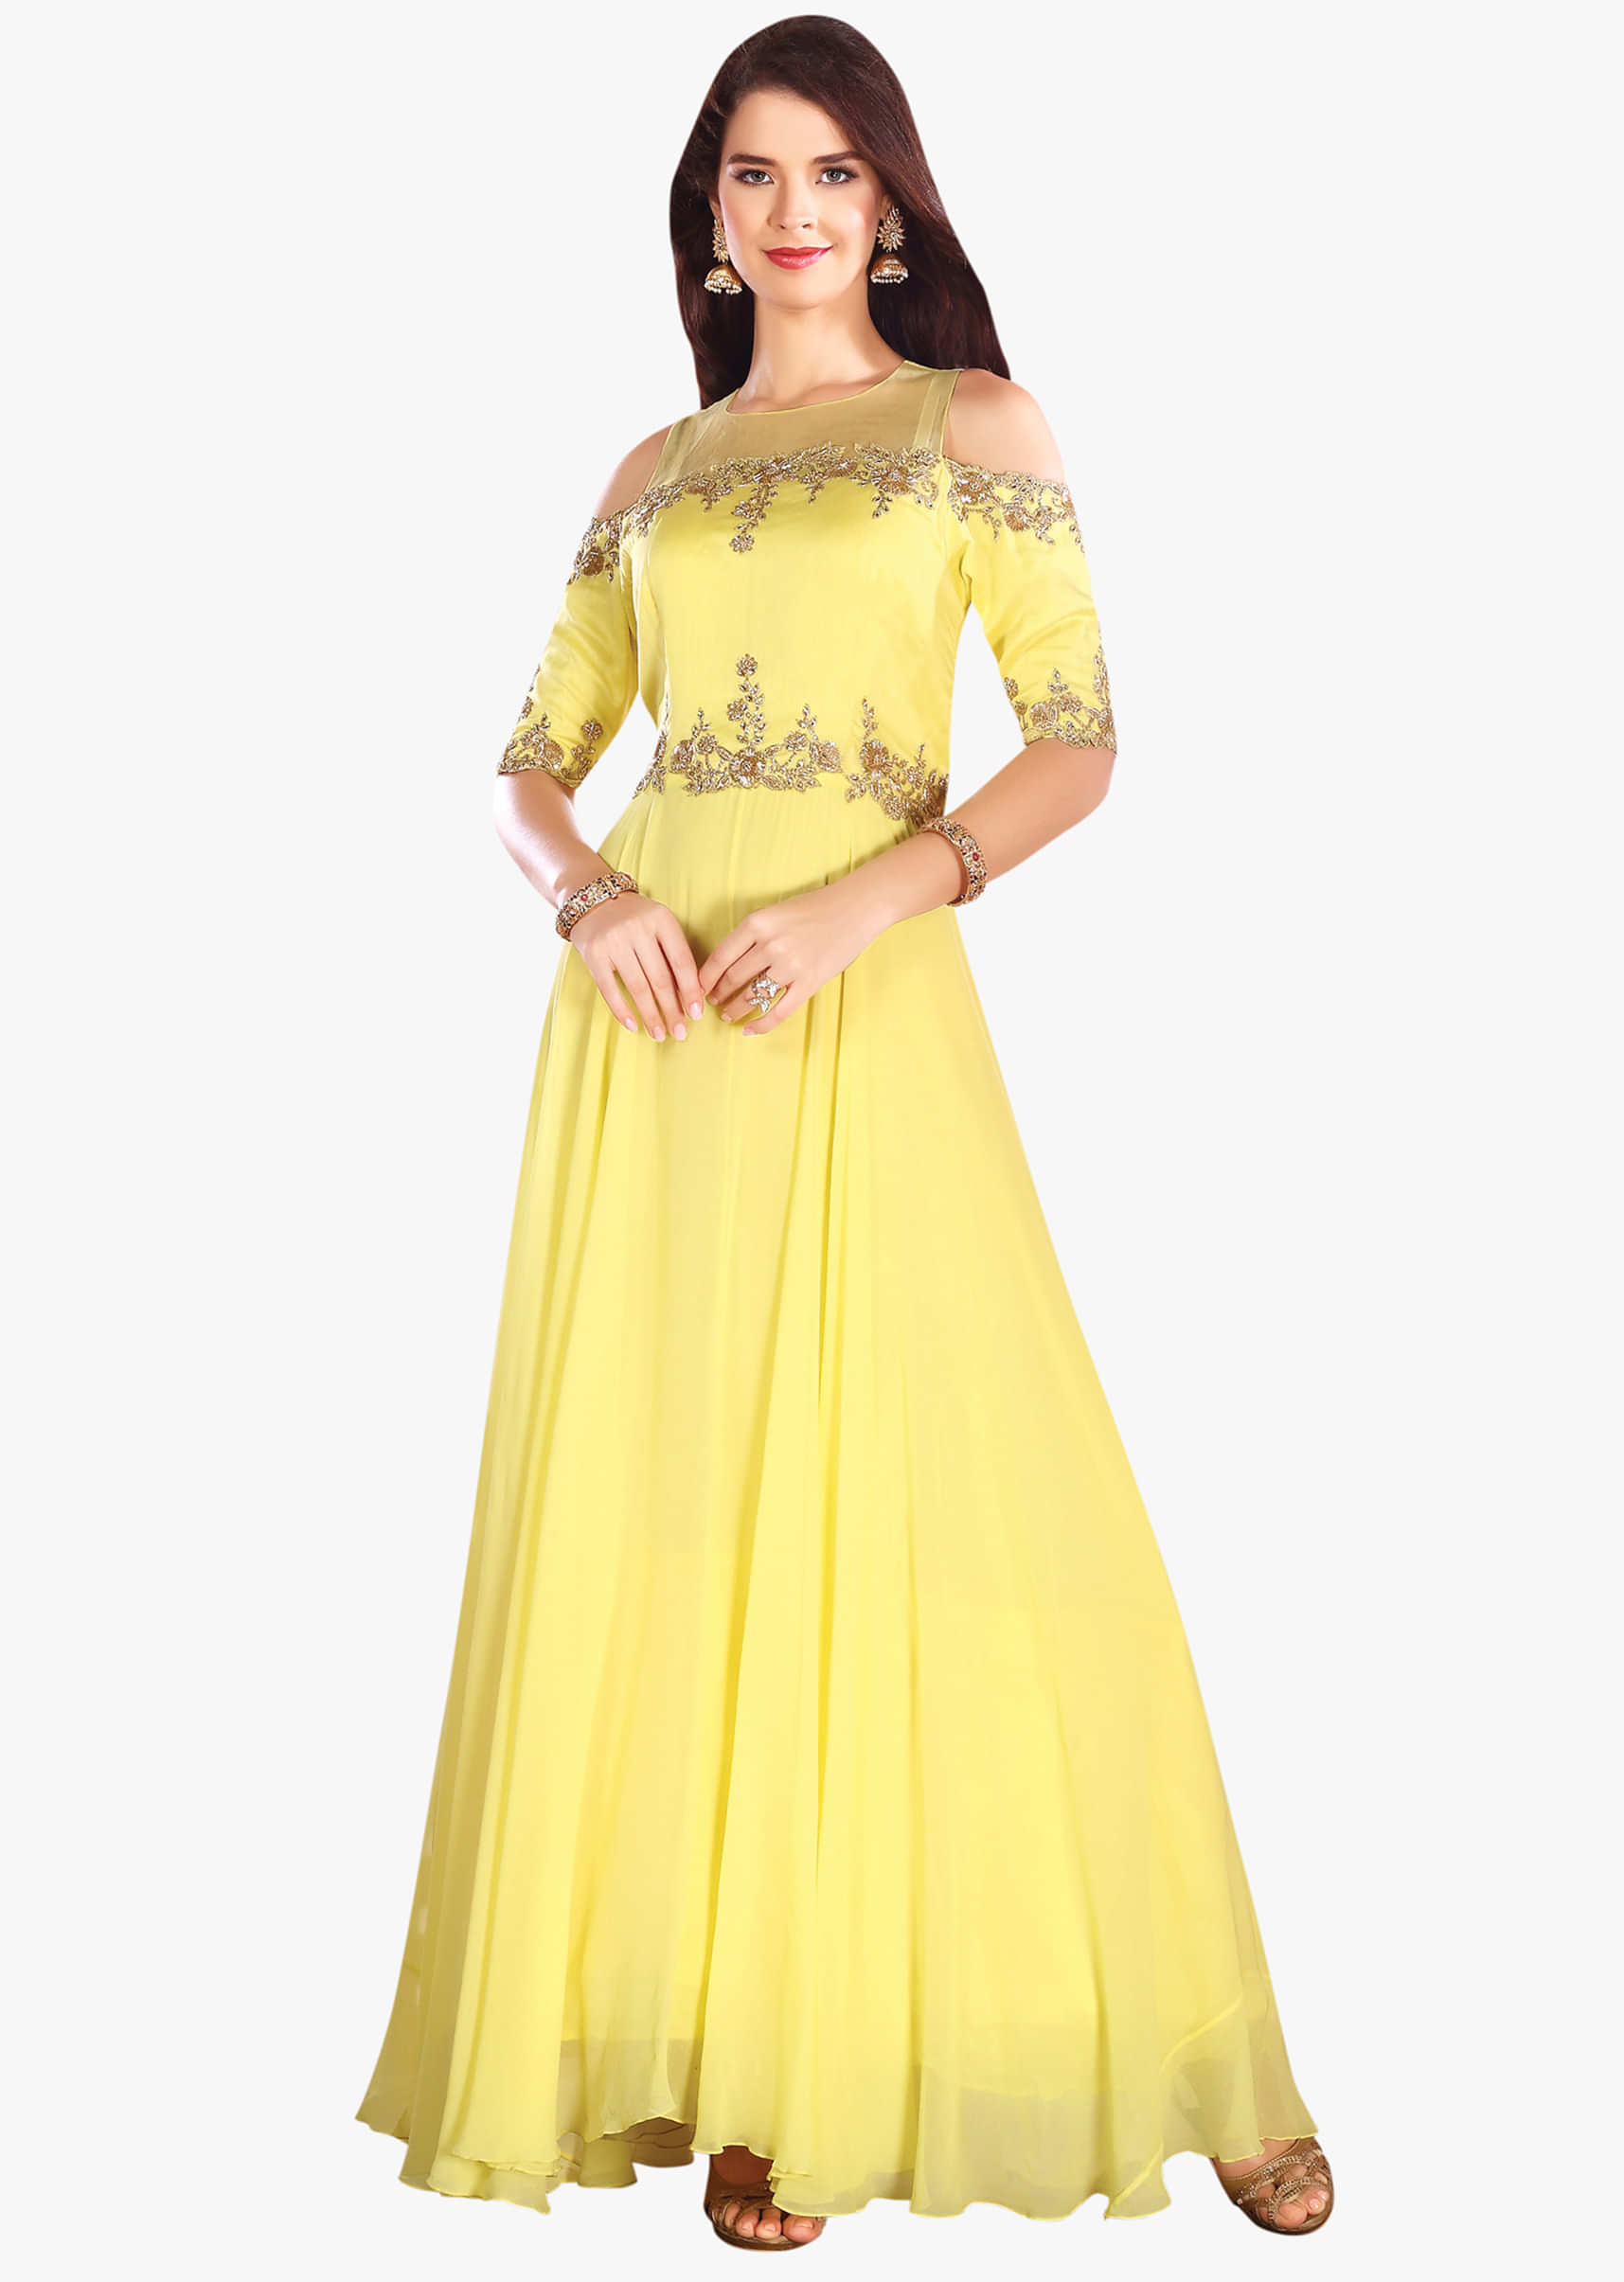 Vibrant yellow gown in georgette with cold shoulder and embroidered bodice